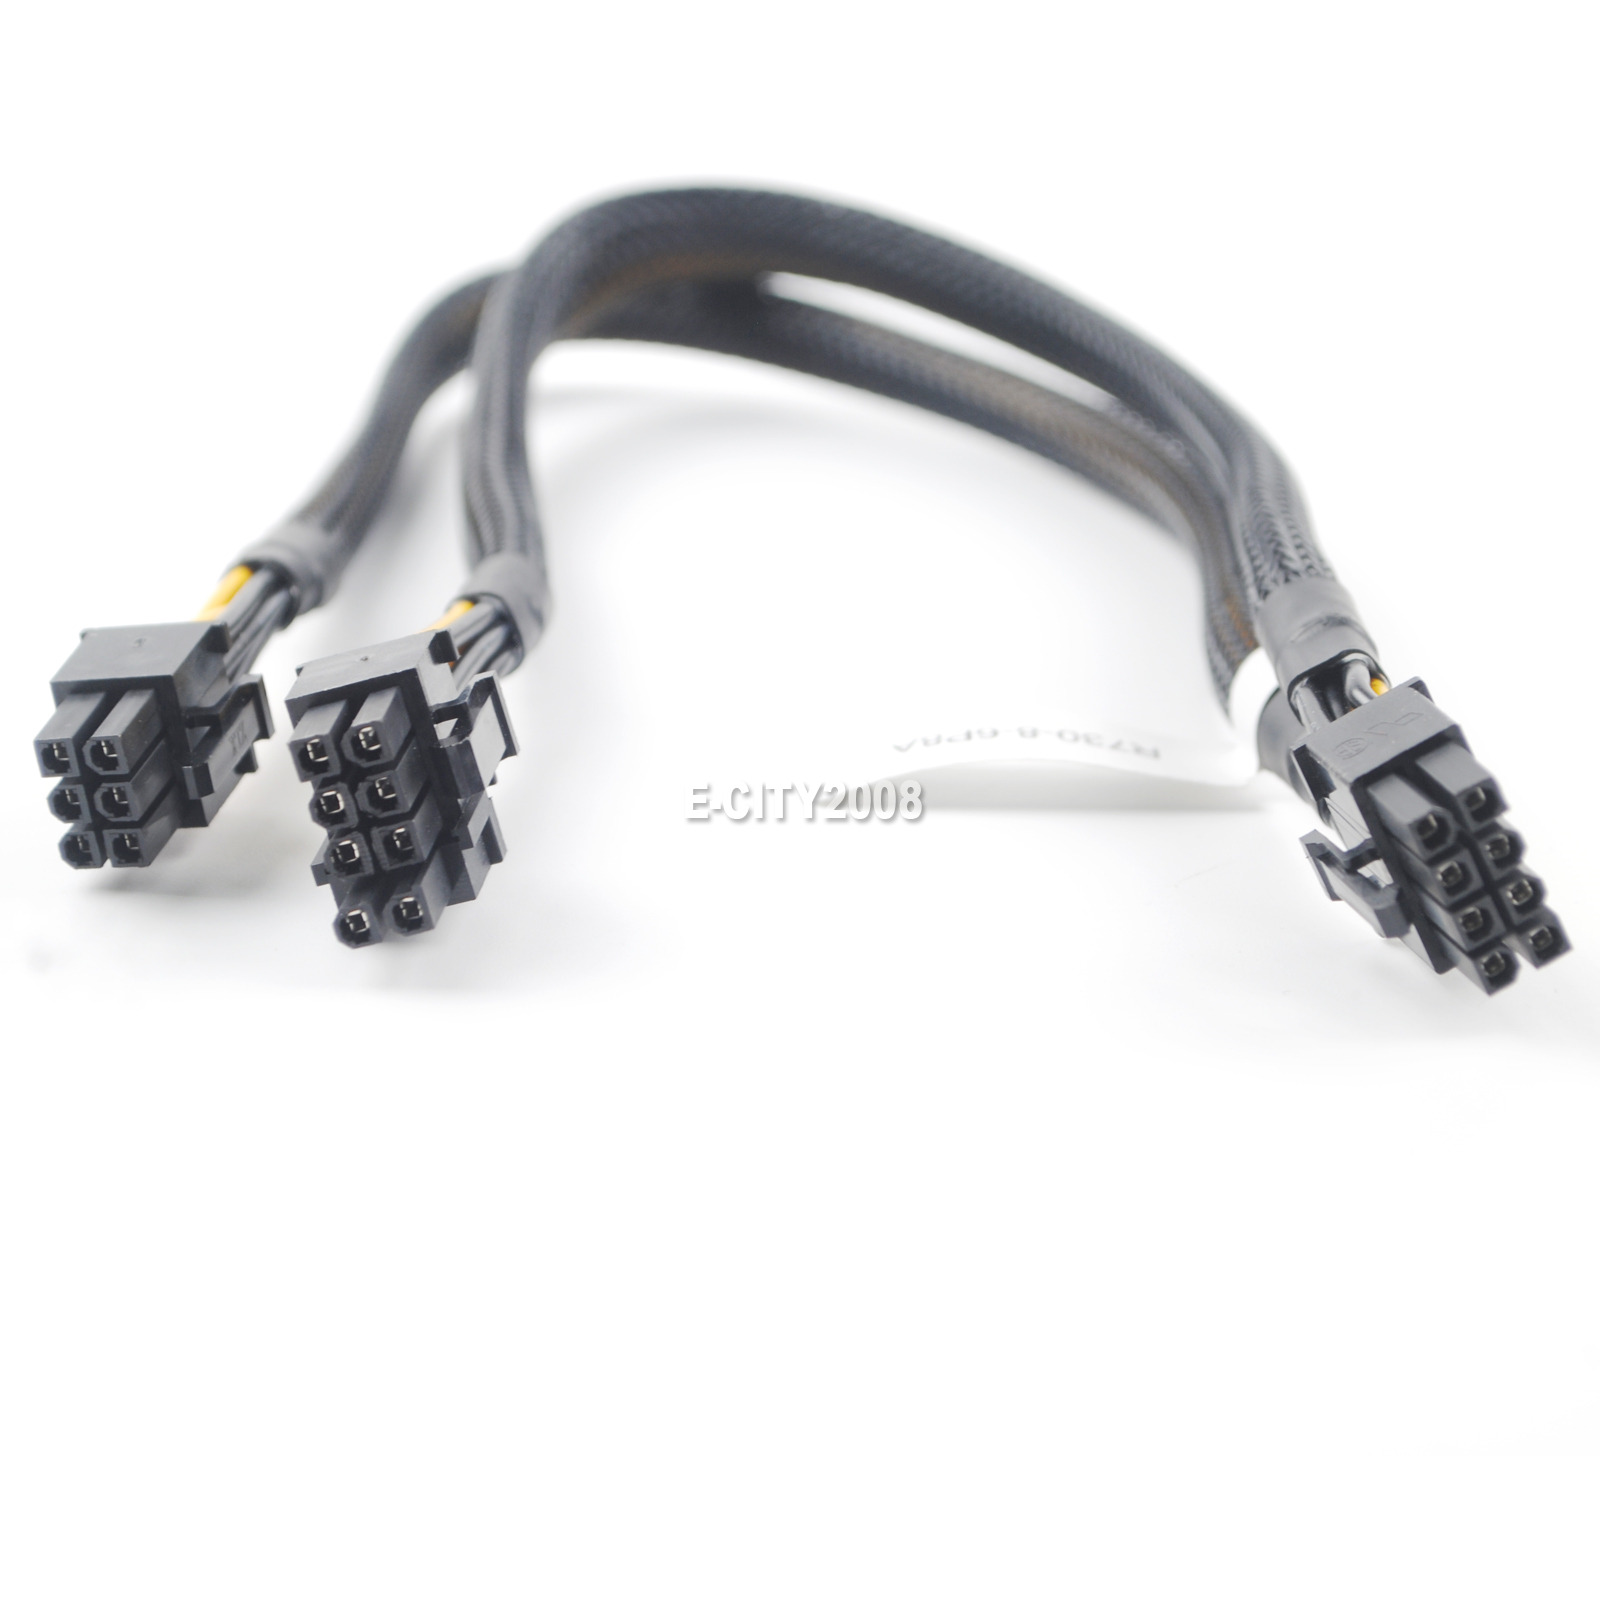 GPU POWER CABLE 8Pin to 8+6Pin FOR DELL T620 3692K 35cm US